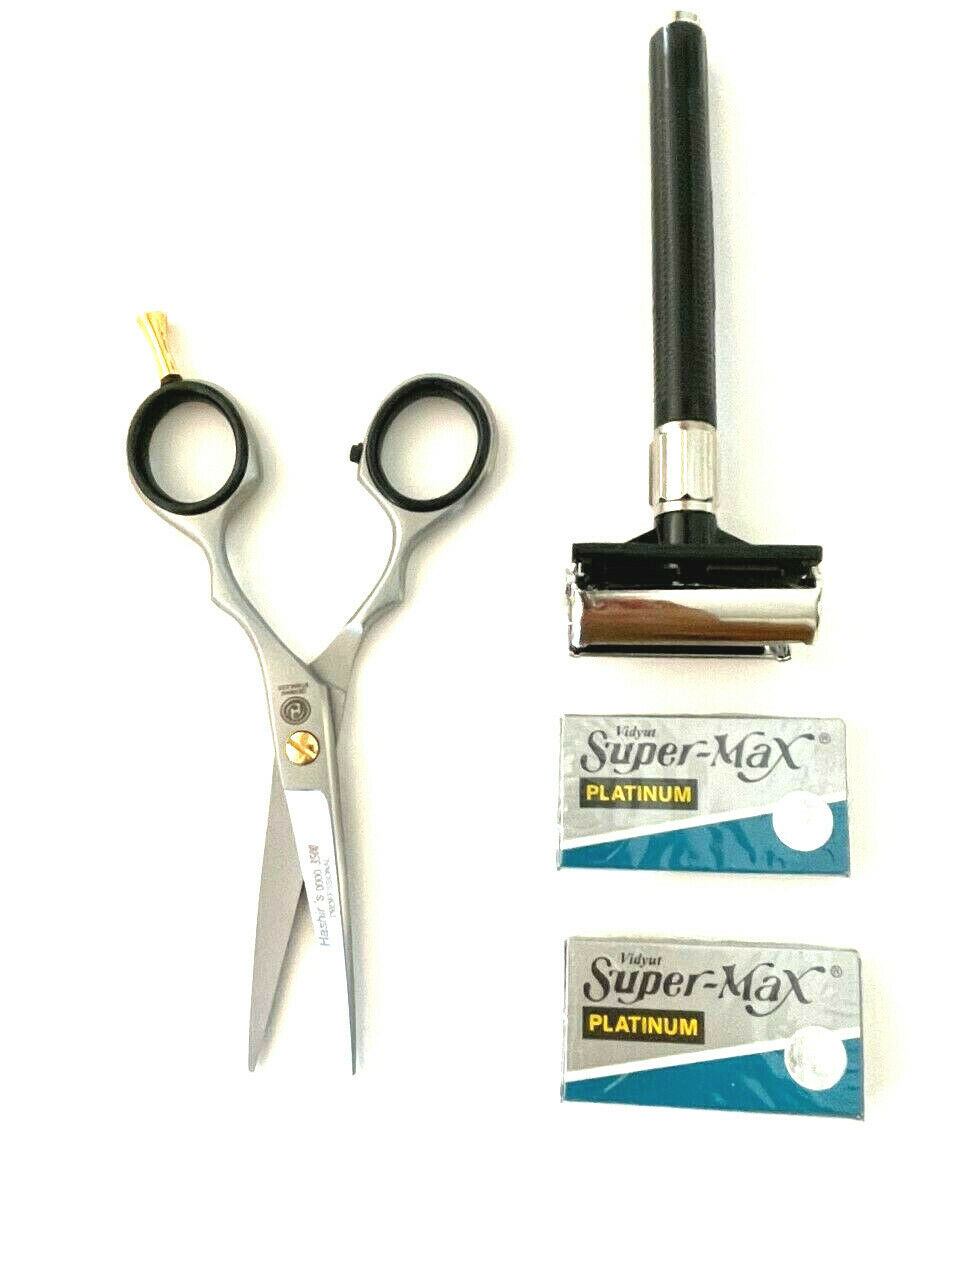 8 Big Super Sharp Scissors - Perfect for Hair-Stylist,, Hashir Products